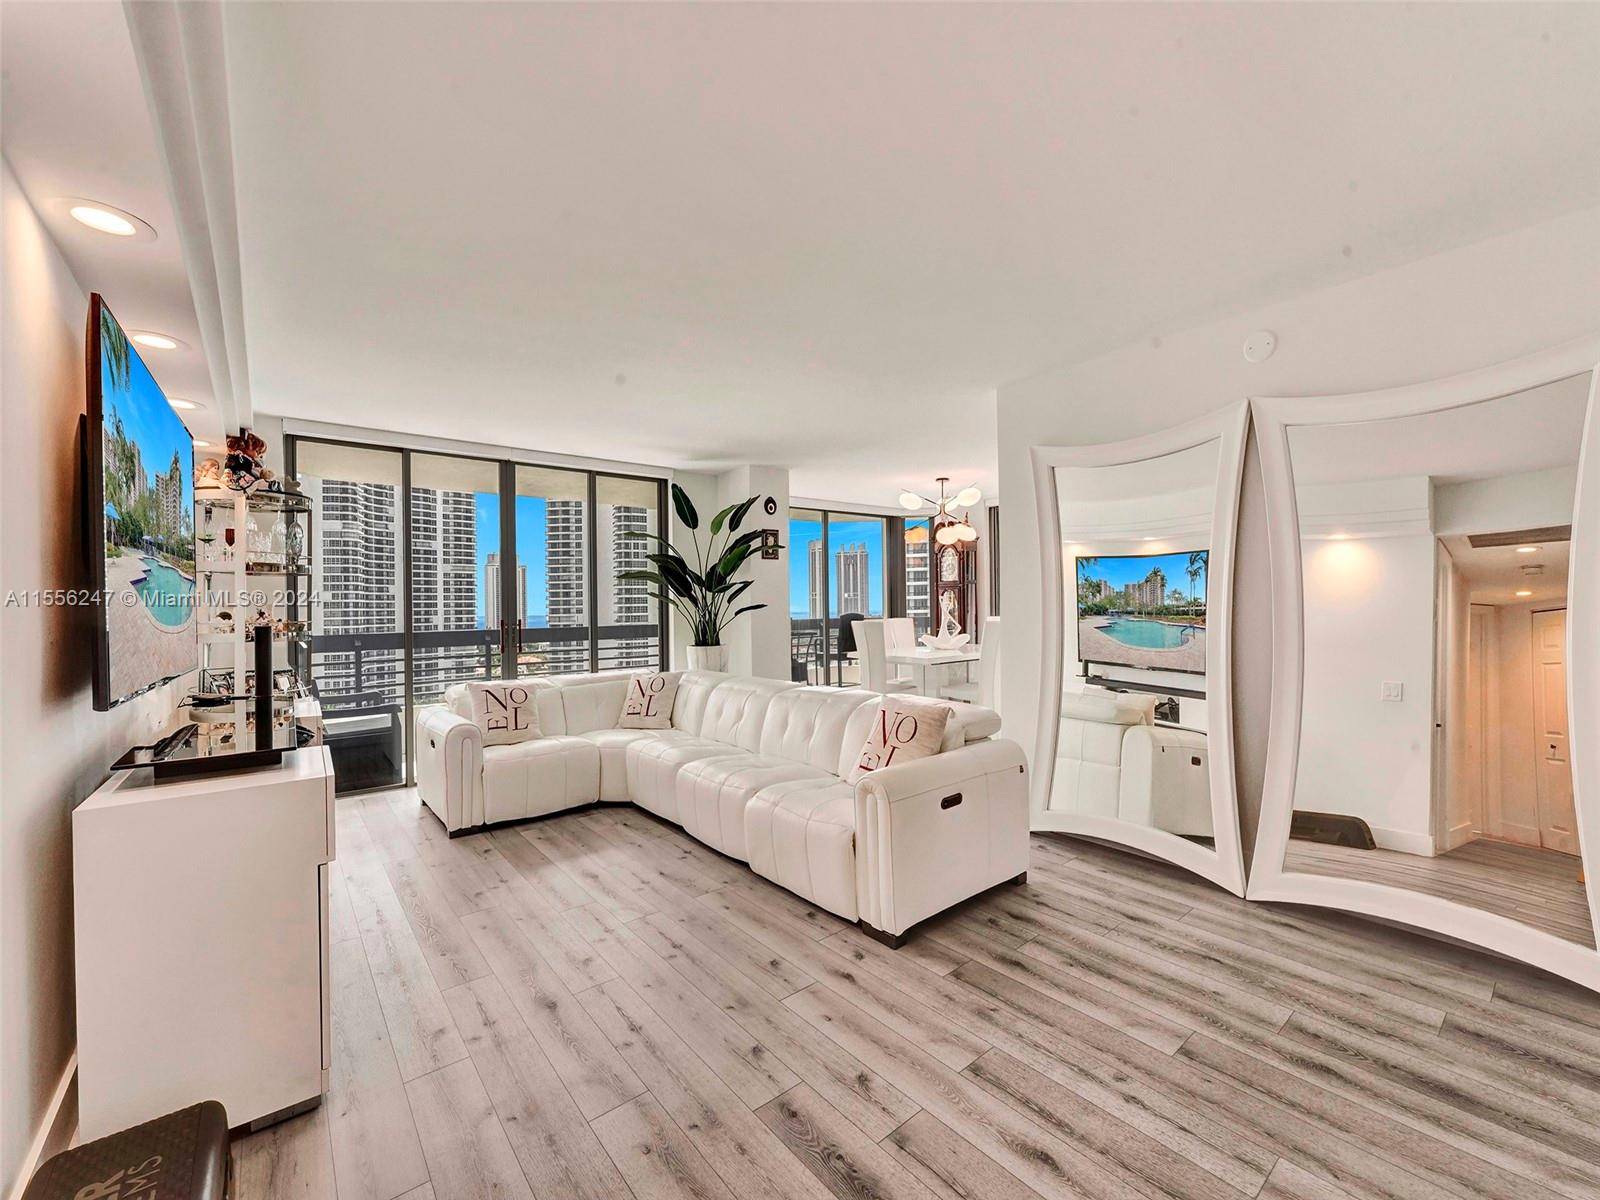 Discover your dream home in Aventura a stunning 3 bed, 3 bath oasis spanning 1, 714 sqft with an open plan, bathed in natural light, and breathtaking views from expansive ...